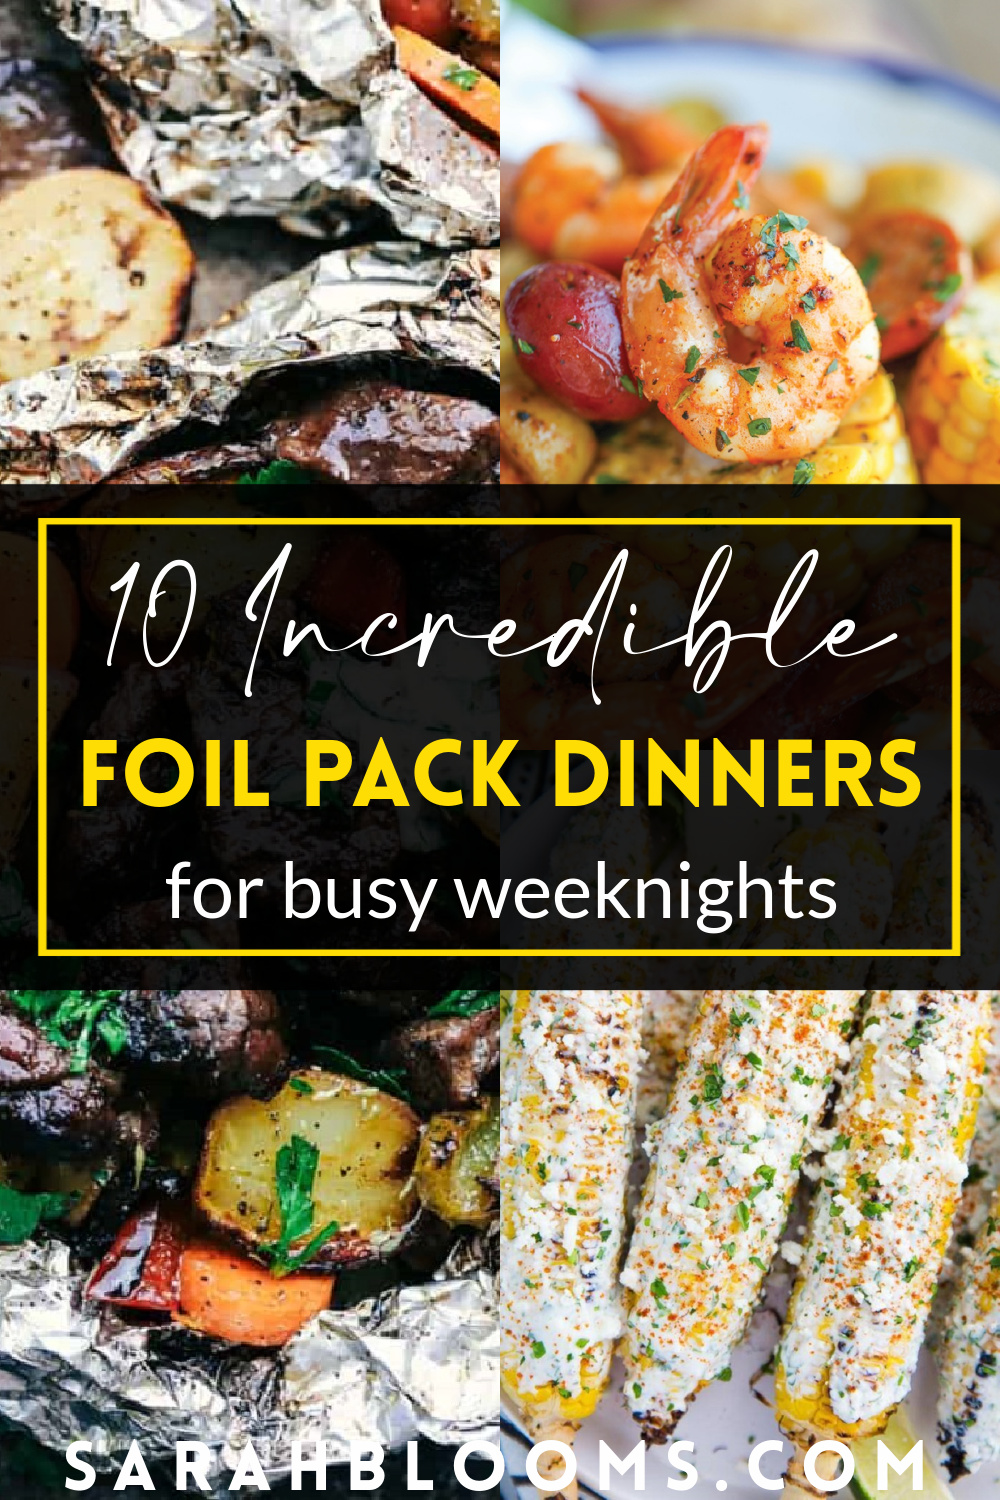 Get a healthy, filling meal on the table in minutes with these 10 Best Foil Pack Dinners for quick and easy weeknight meals and easy clean-up! #foilpackmeals #foilpackdinners #foilpackrecipes #quickmeals #weeknightmeals